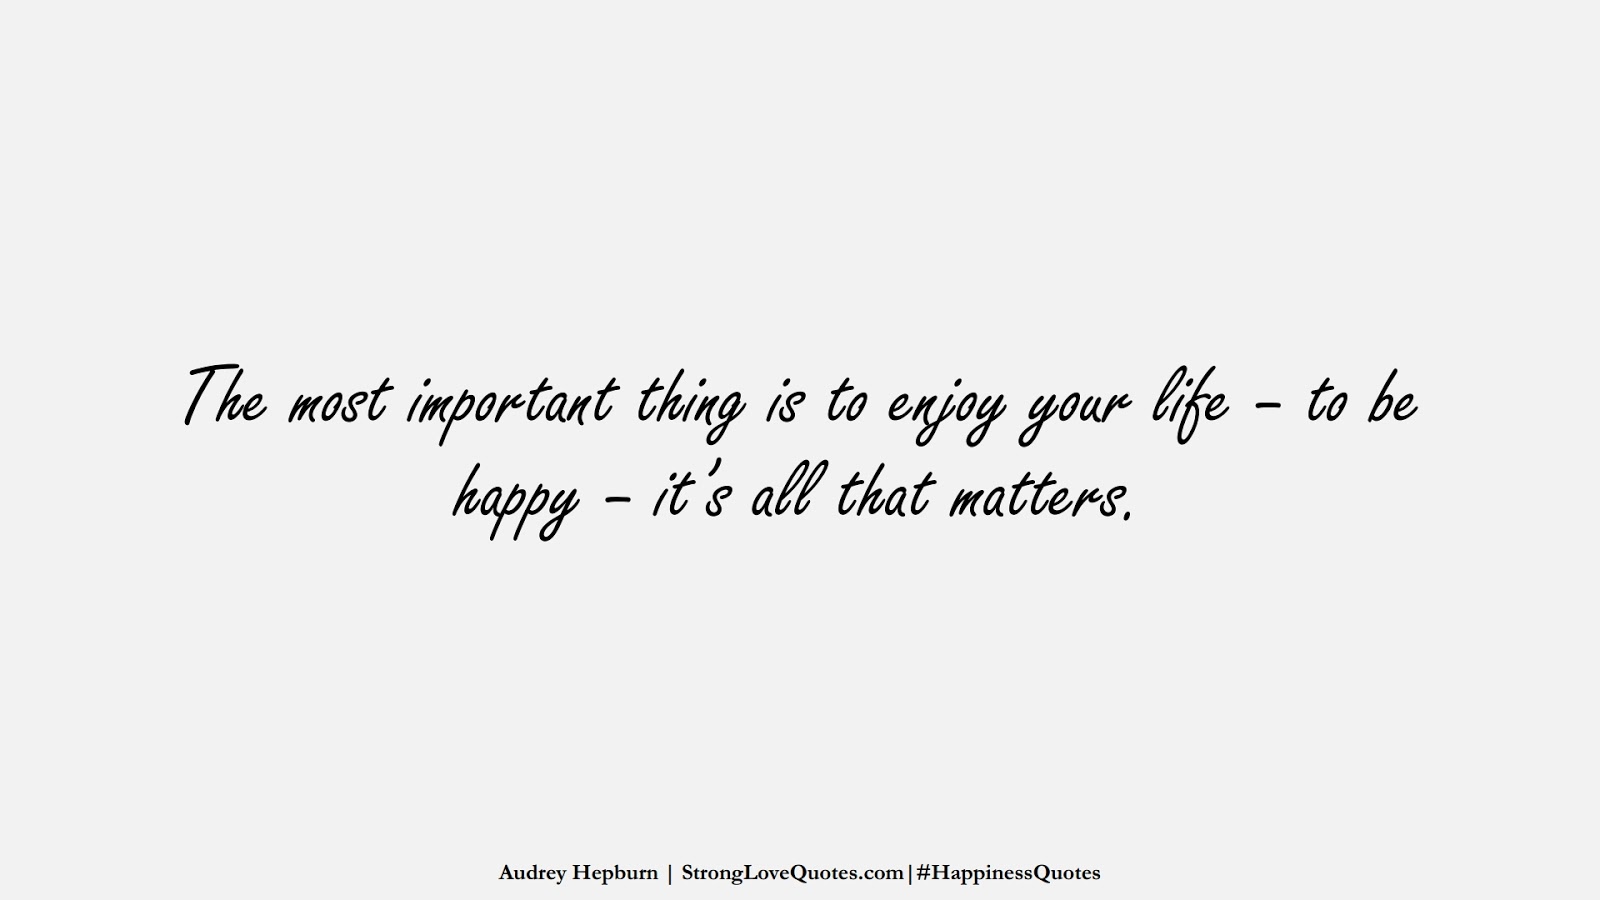 The most important thing is to enjoy your life – to be happy – it’s all that matters. (Audrey Hepburn);  #HappinessQuotes